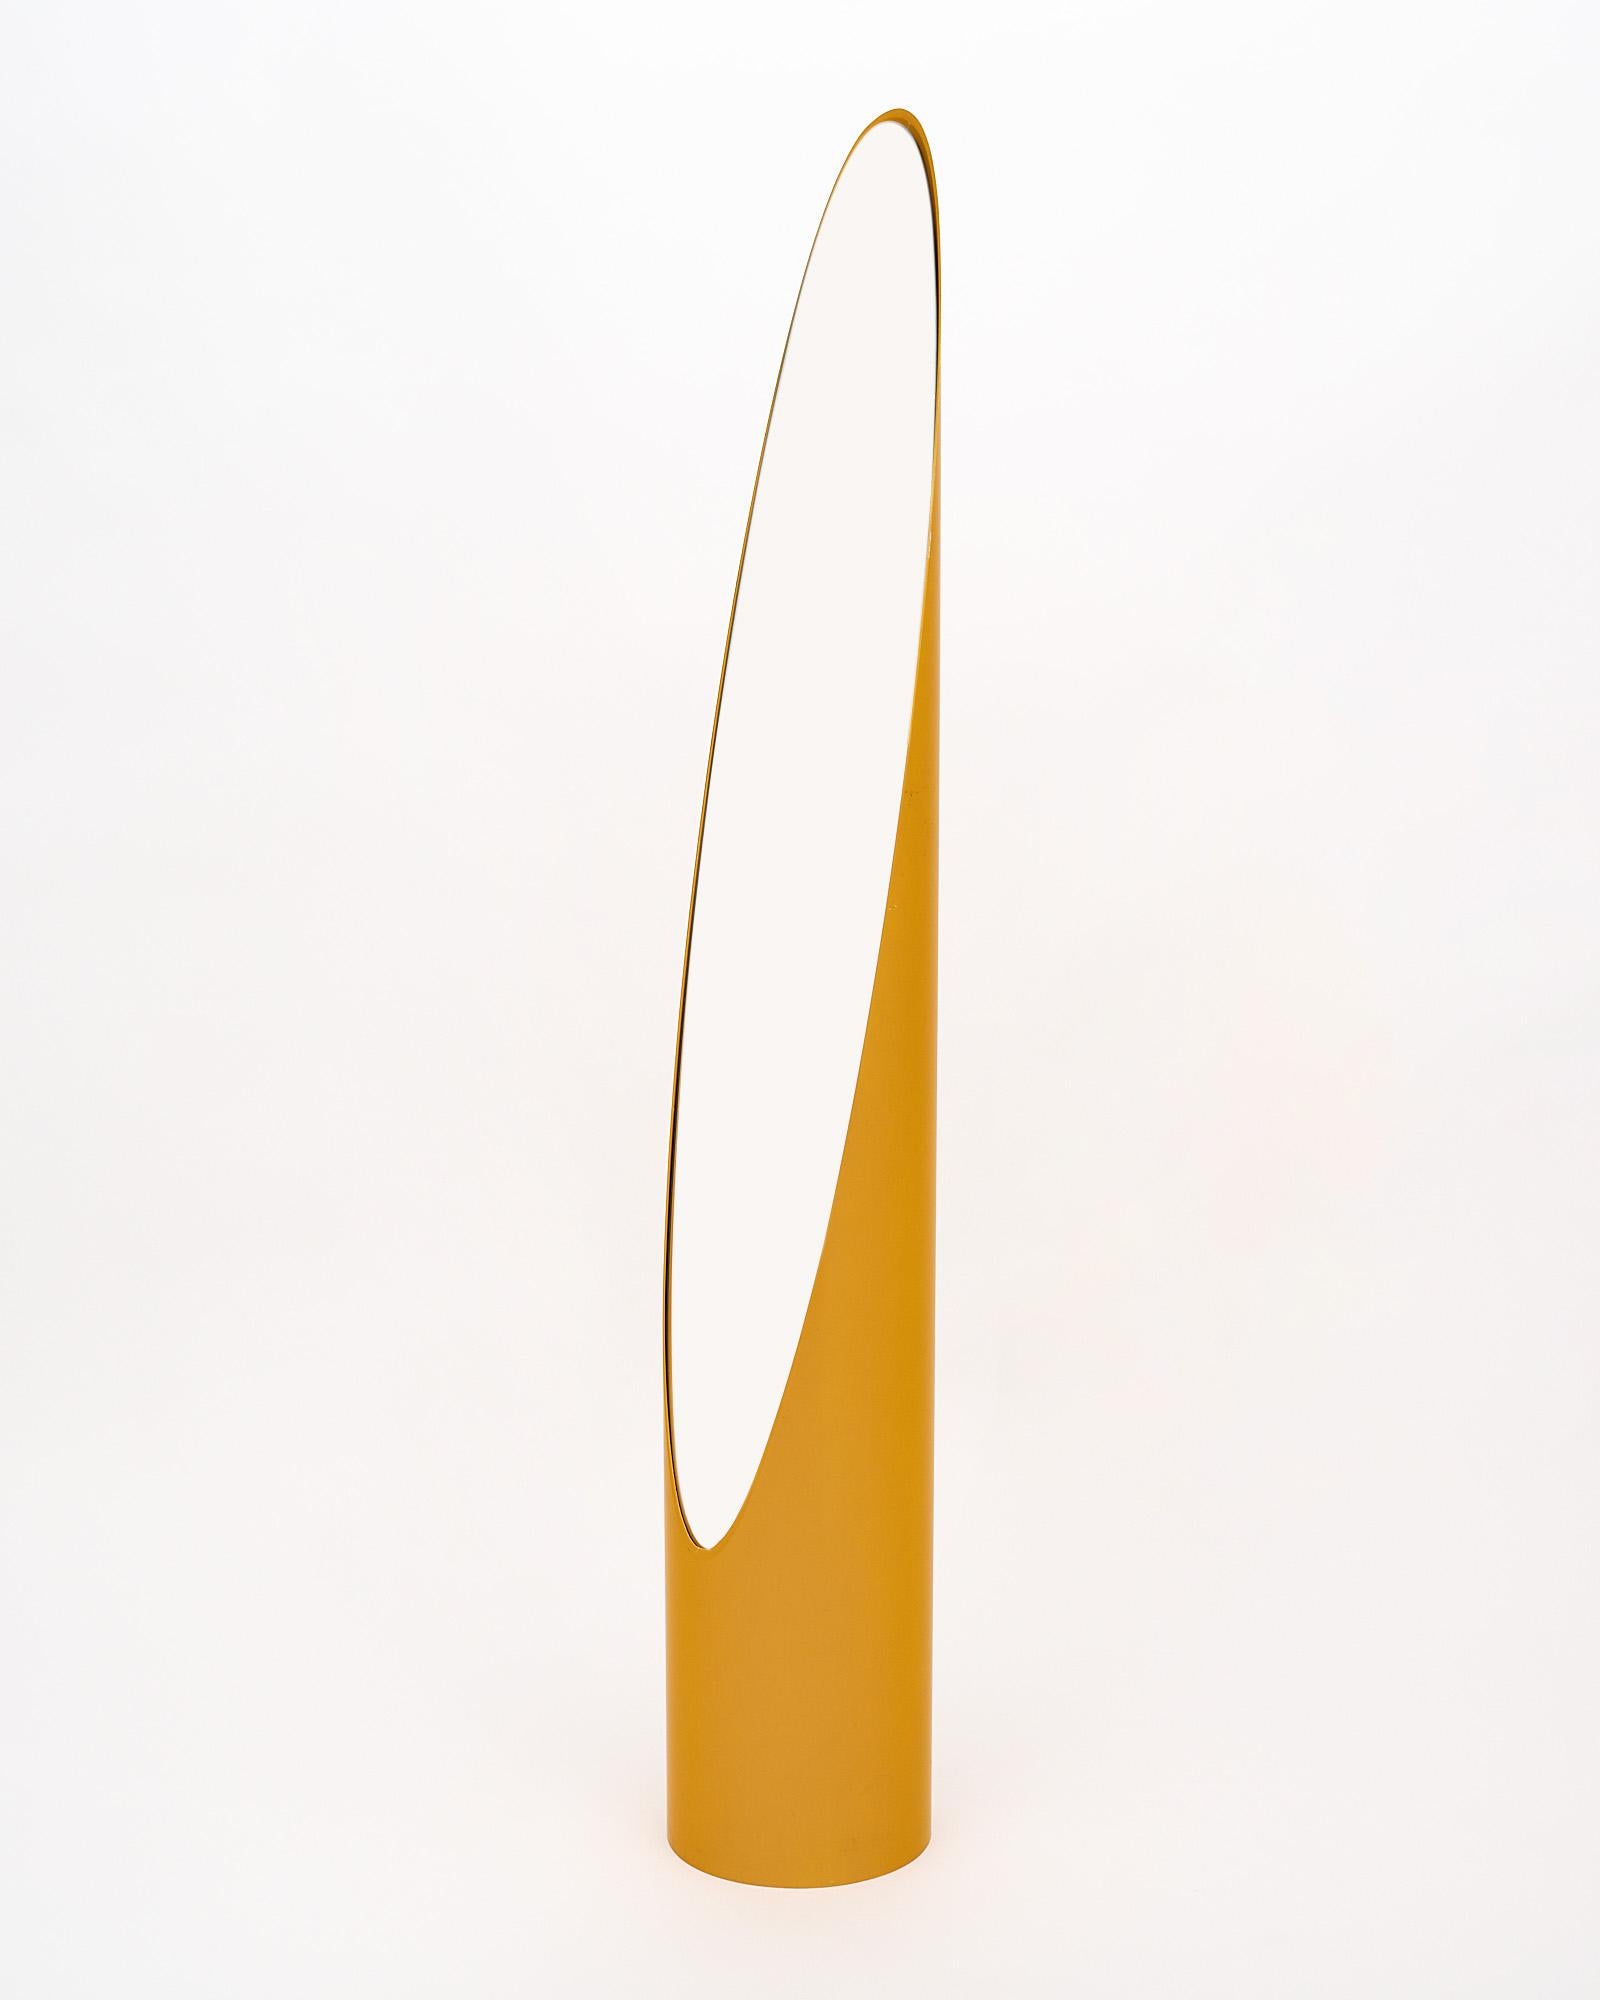 Unghia lipstick mirror by Rodolfo Bonetto made with a yellow acrylic case and original oblong mirror.